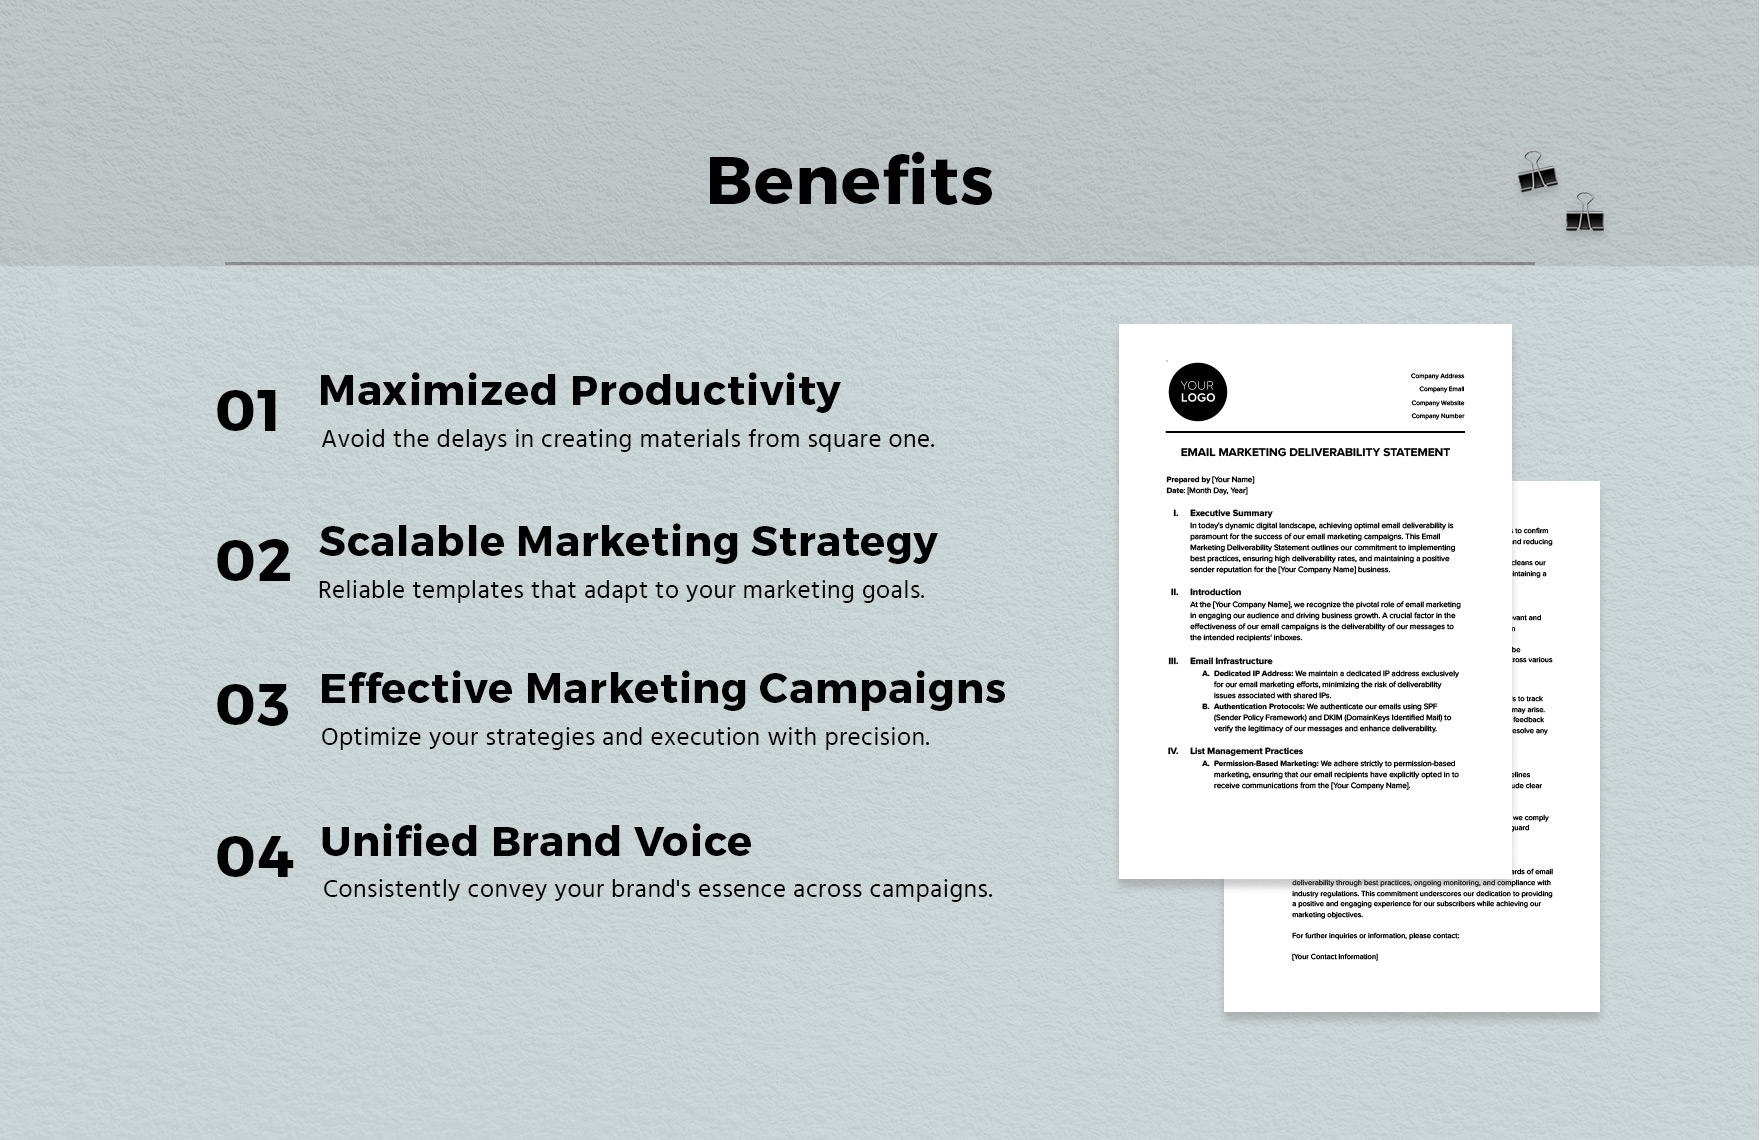 Email Marketing Deliverability Statement Template